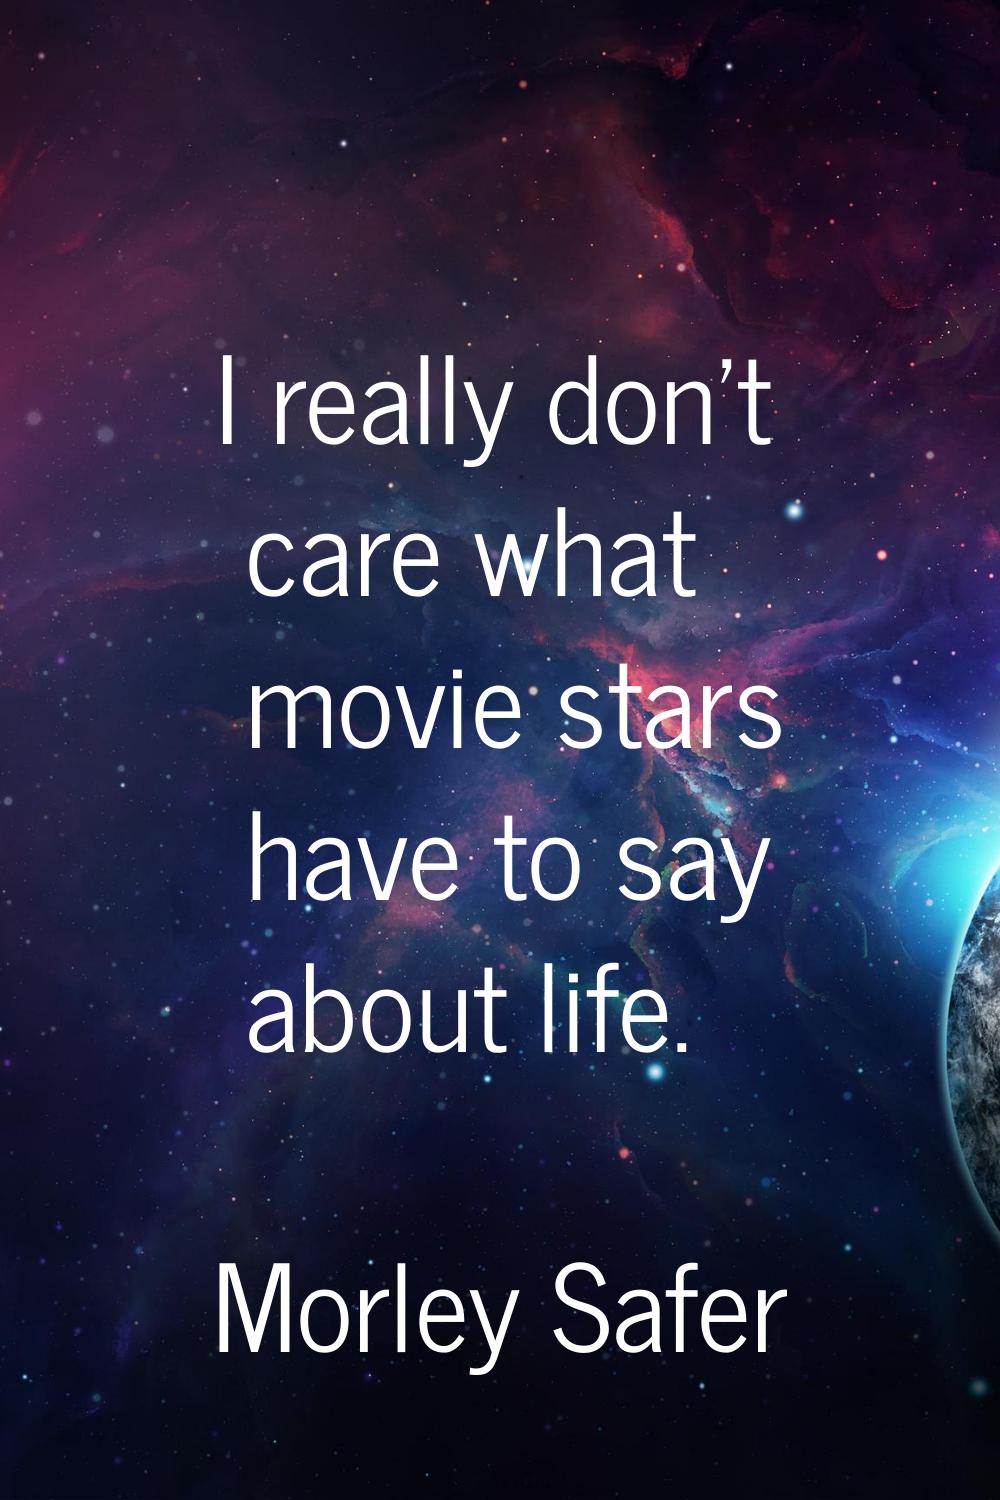 I really don't care what movie stars have to say about life.